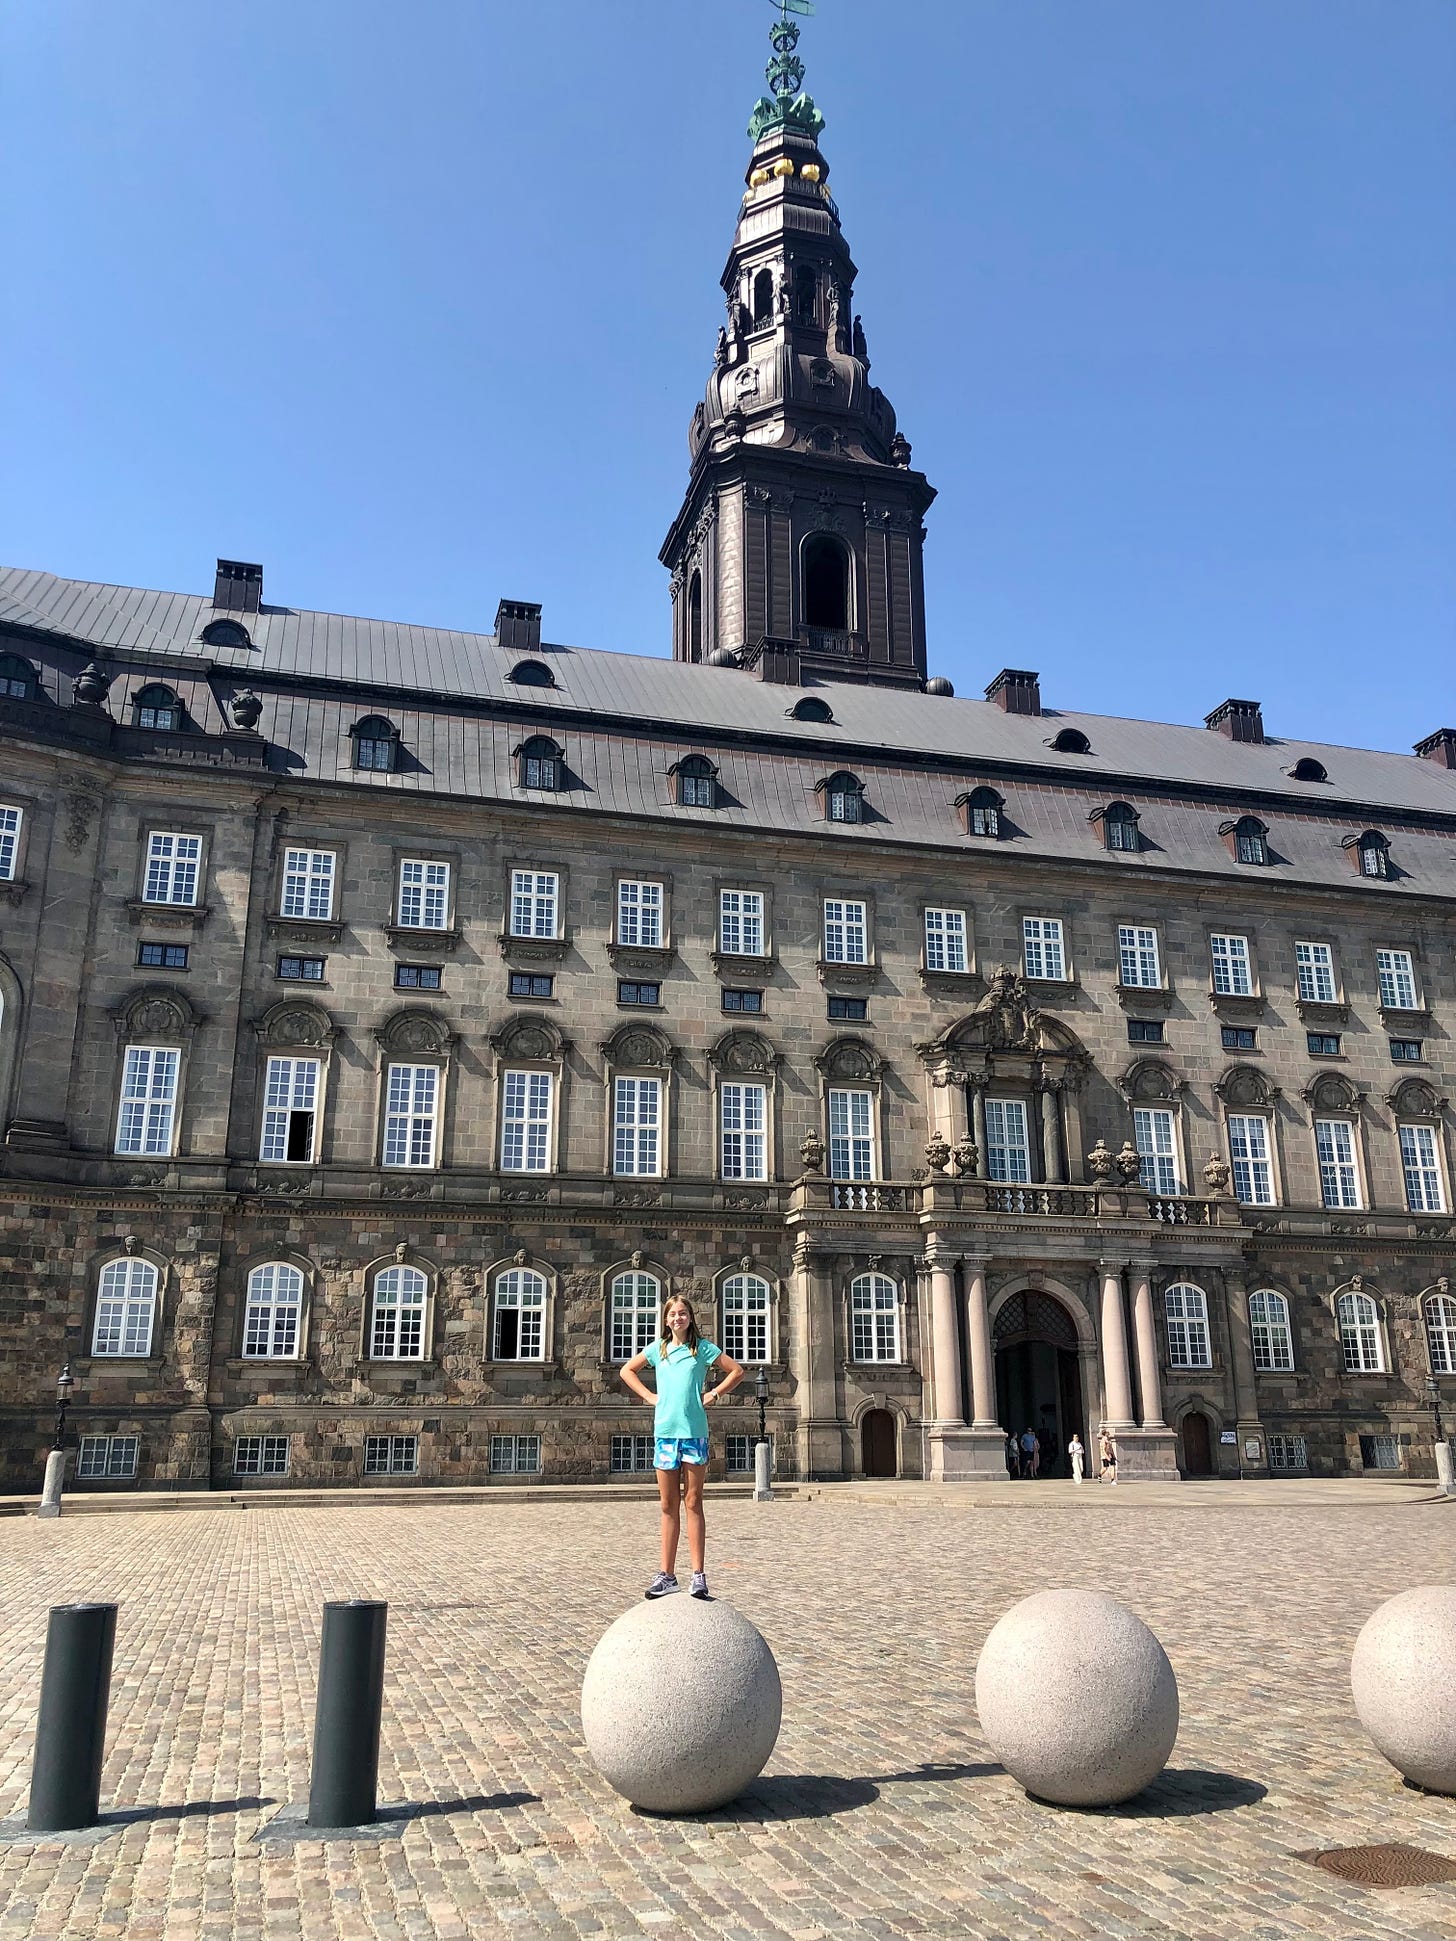 A young girl stands on top of a spherical sculpture in front of Christiansborg Palace